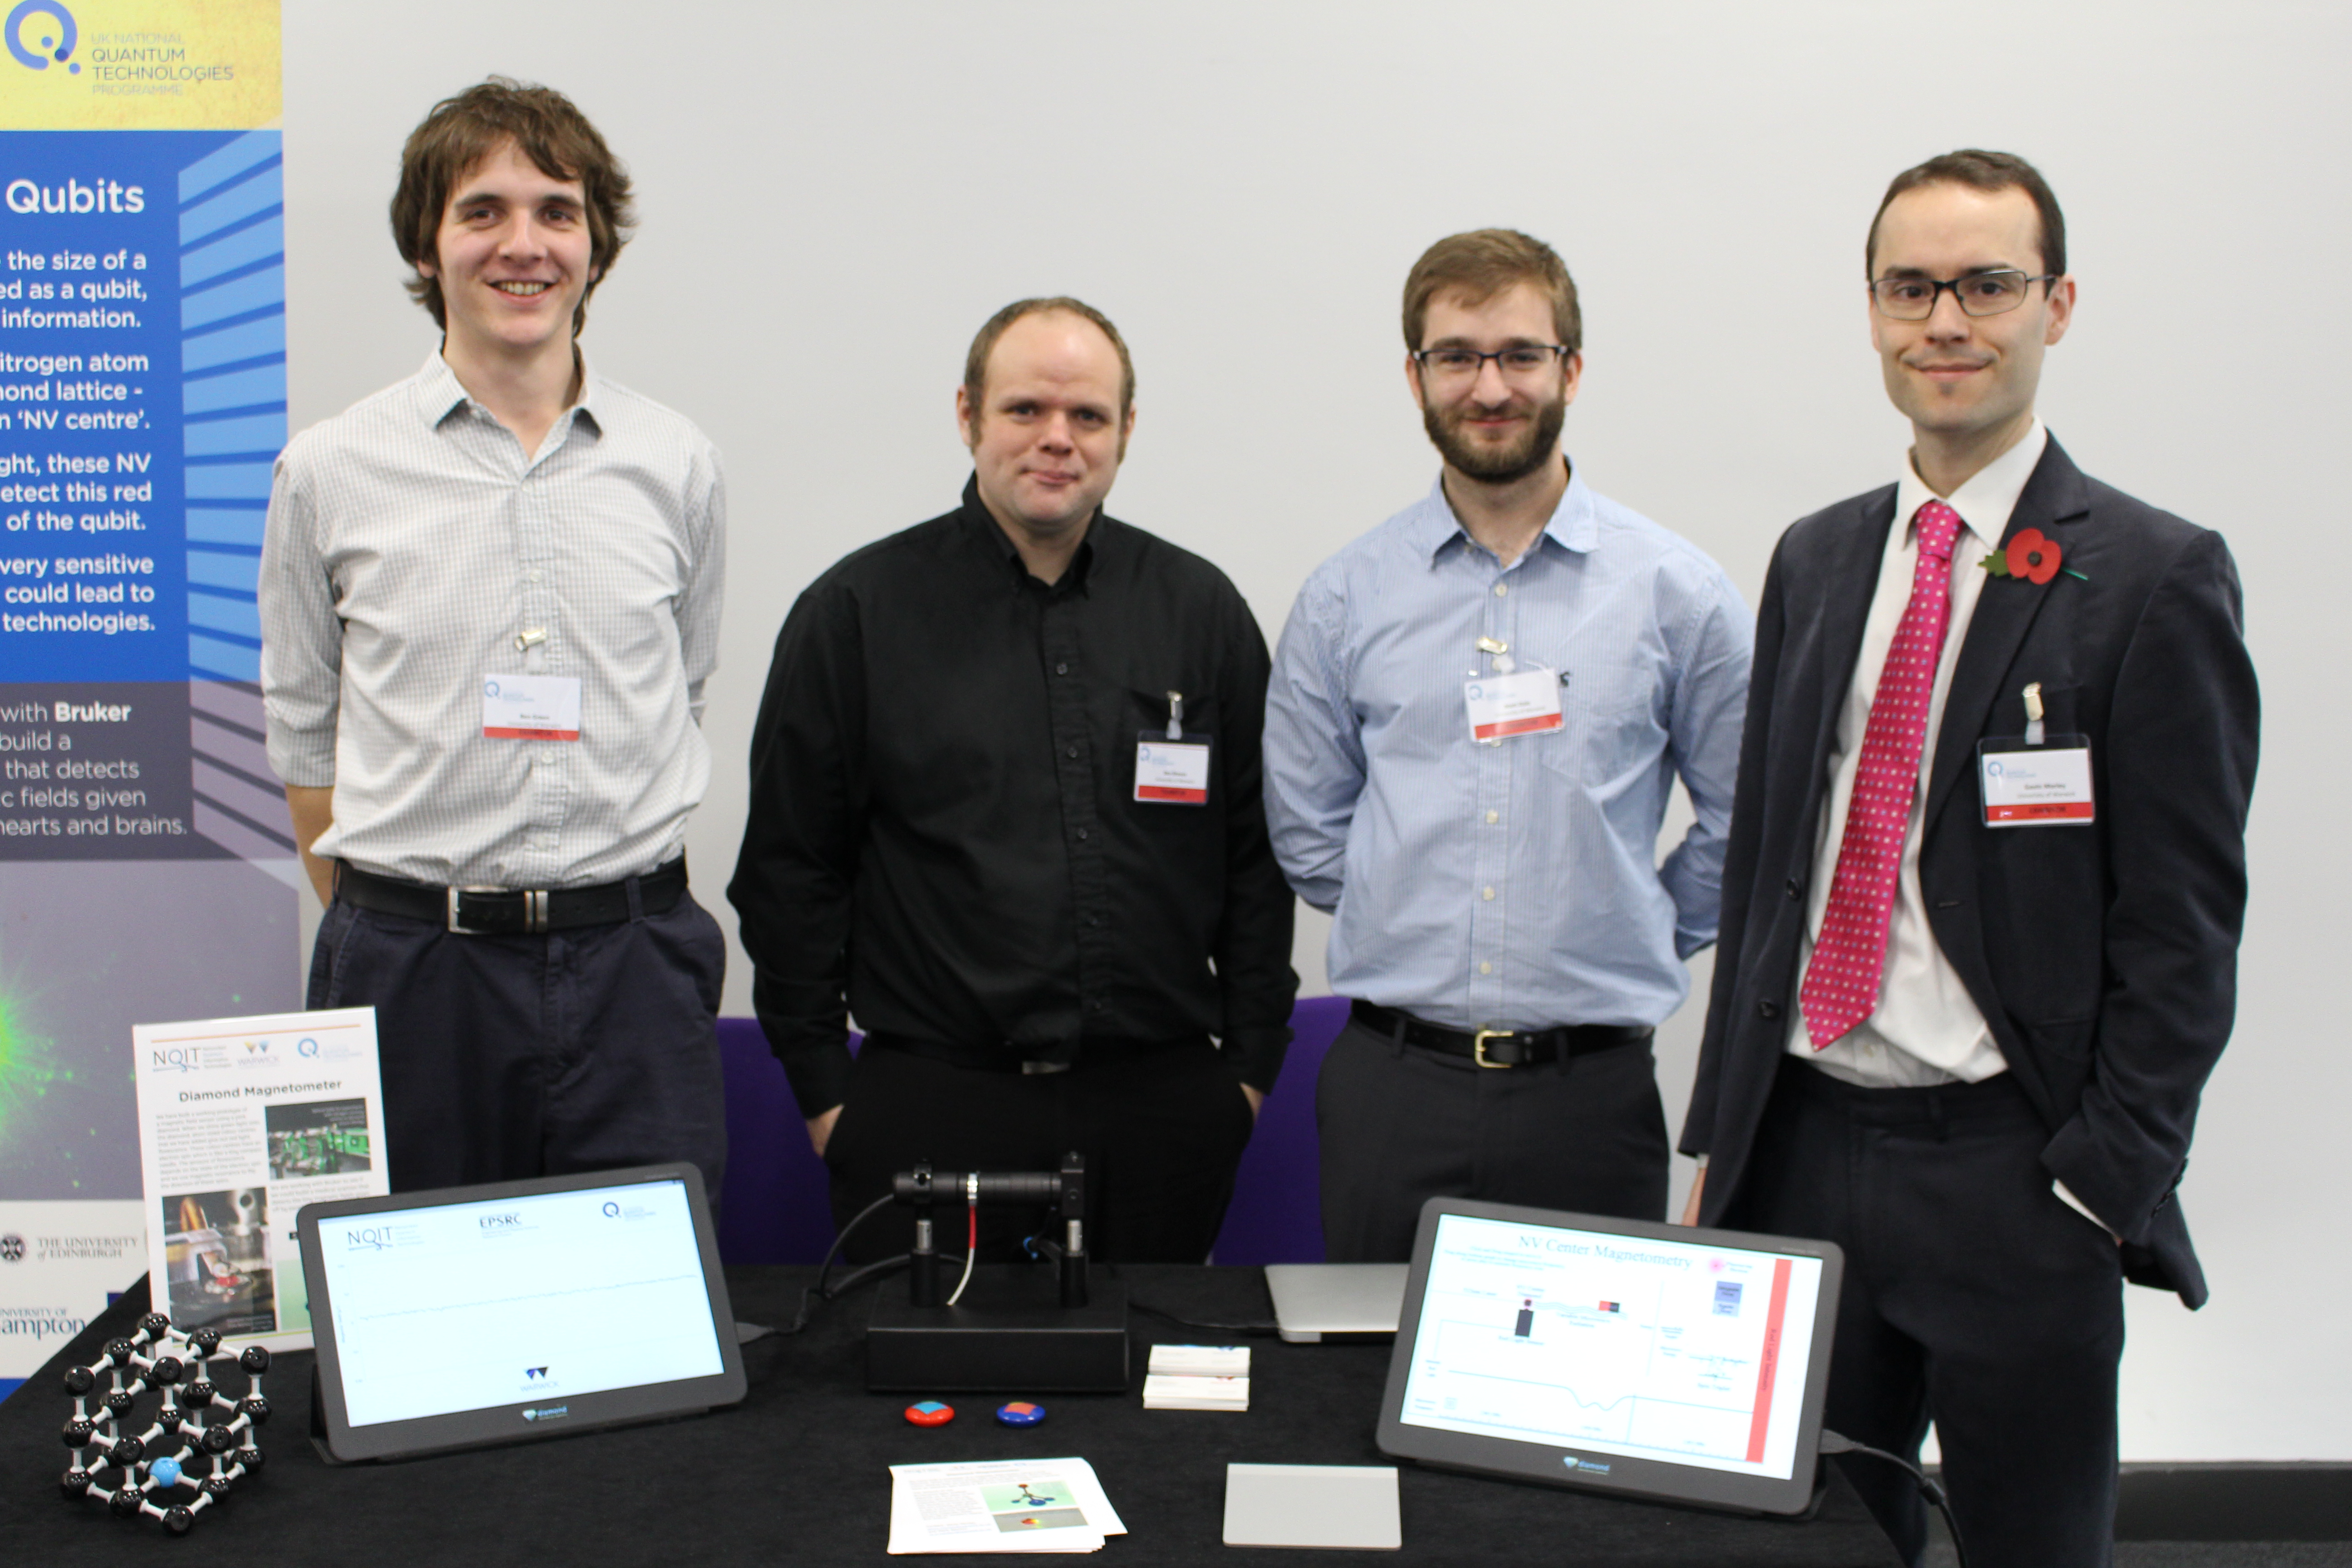 University of Warwick researchers demonstrating their diamond magnetometer at the Quantum Technology Showcase 2016 in Westminster. From left: Ben Green, Ben Breeze, Matt Dale and Gavin Morley. 